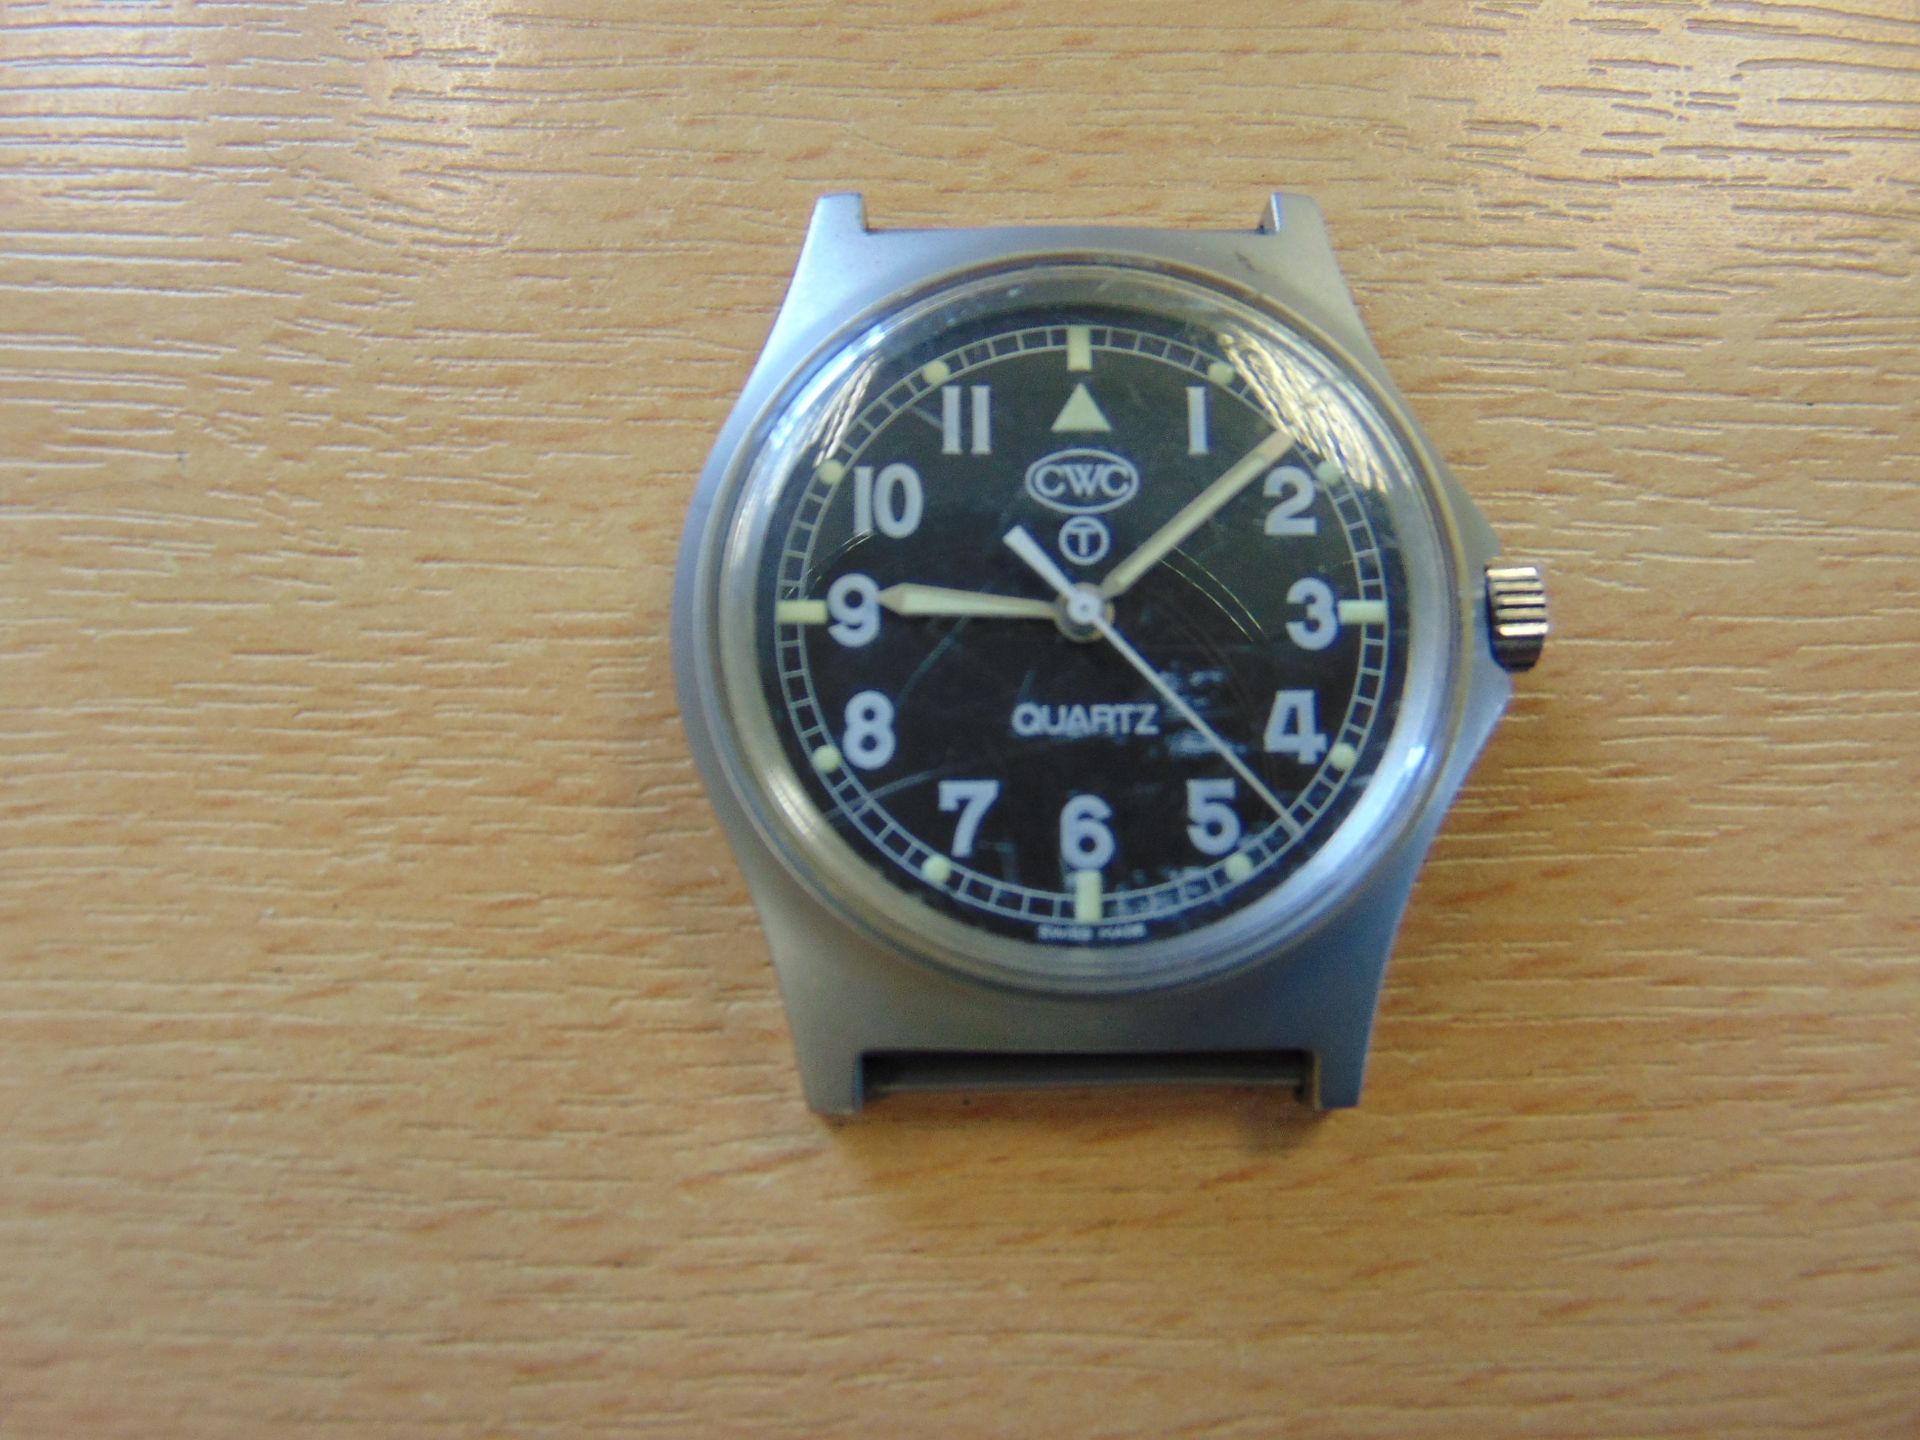 CWC W10 SERVICE WATCH UNISSUED WITH NATO MARKINGS DATED 1997 - Image 3 of 7